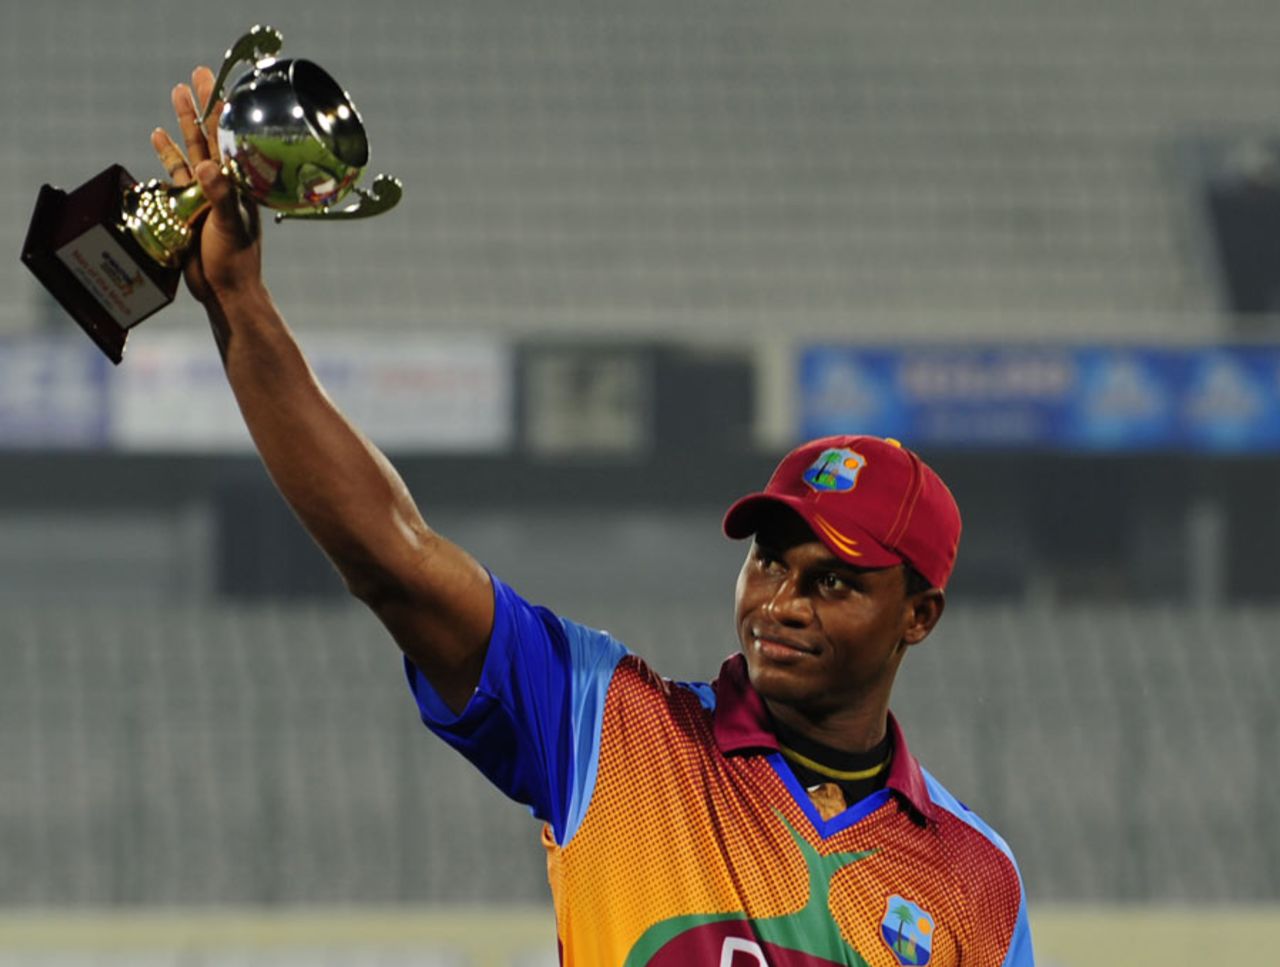 Marlon Samuels with his Man-of-the-Match trophy, Bangladesh v West Indies, 2nd ODI, Mirpur, October 15, 2011
